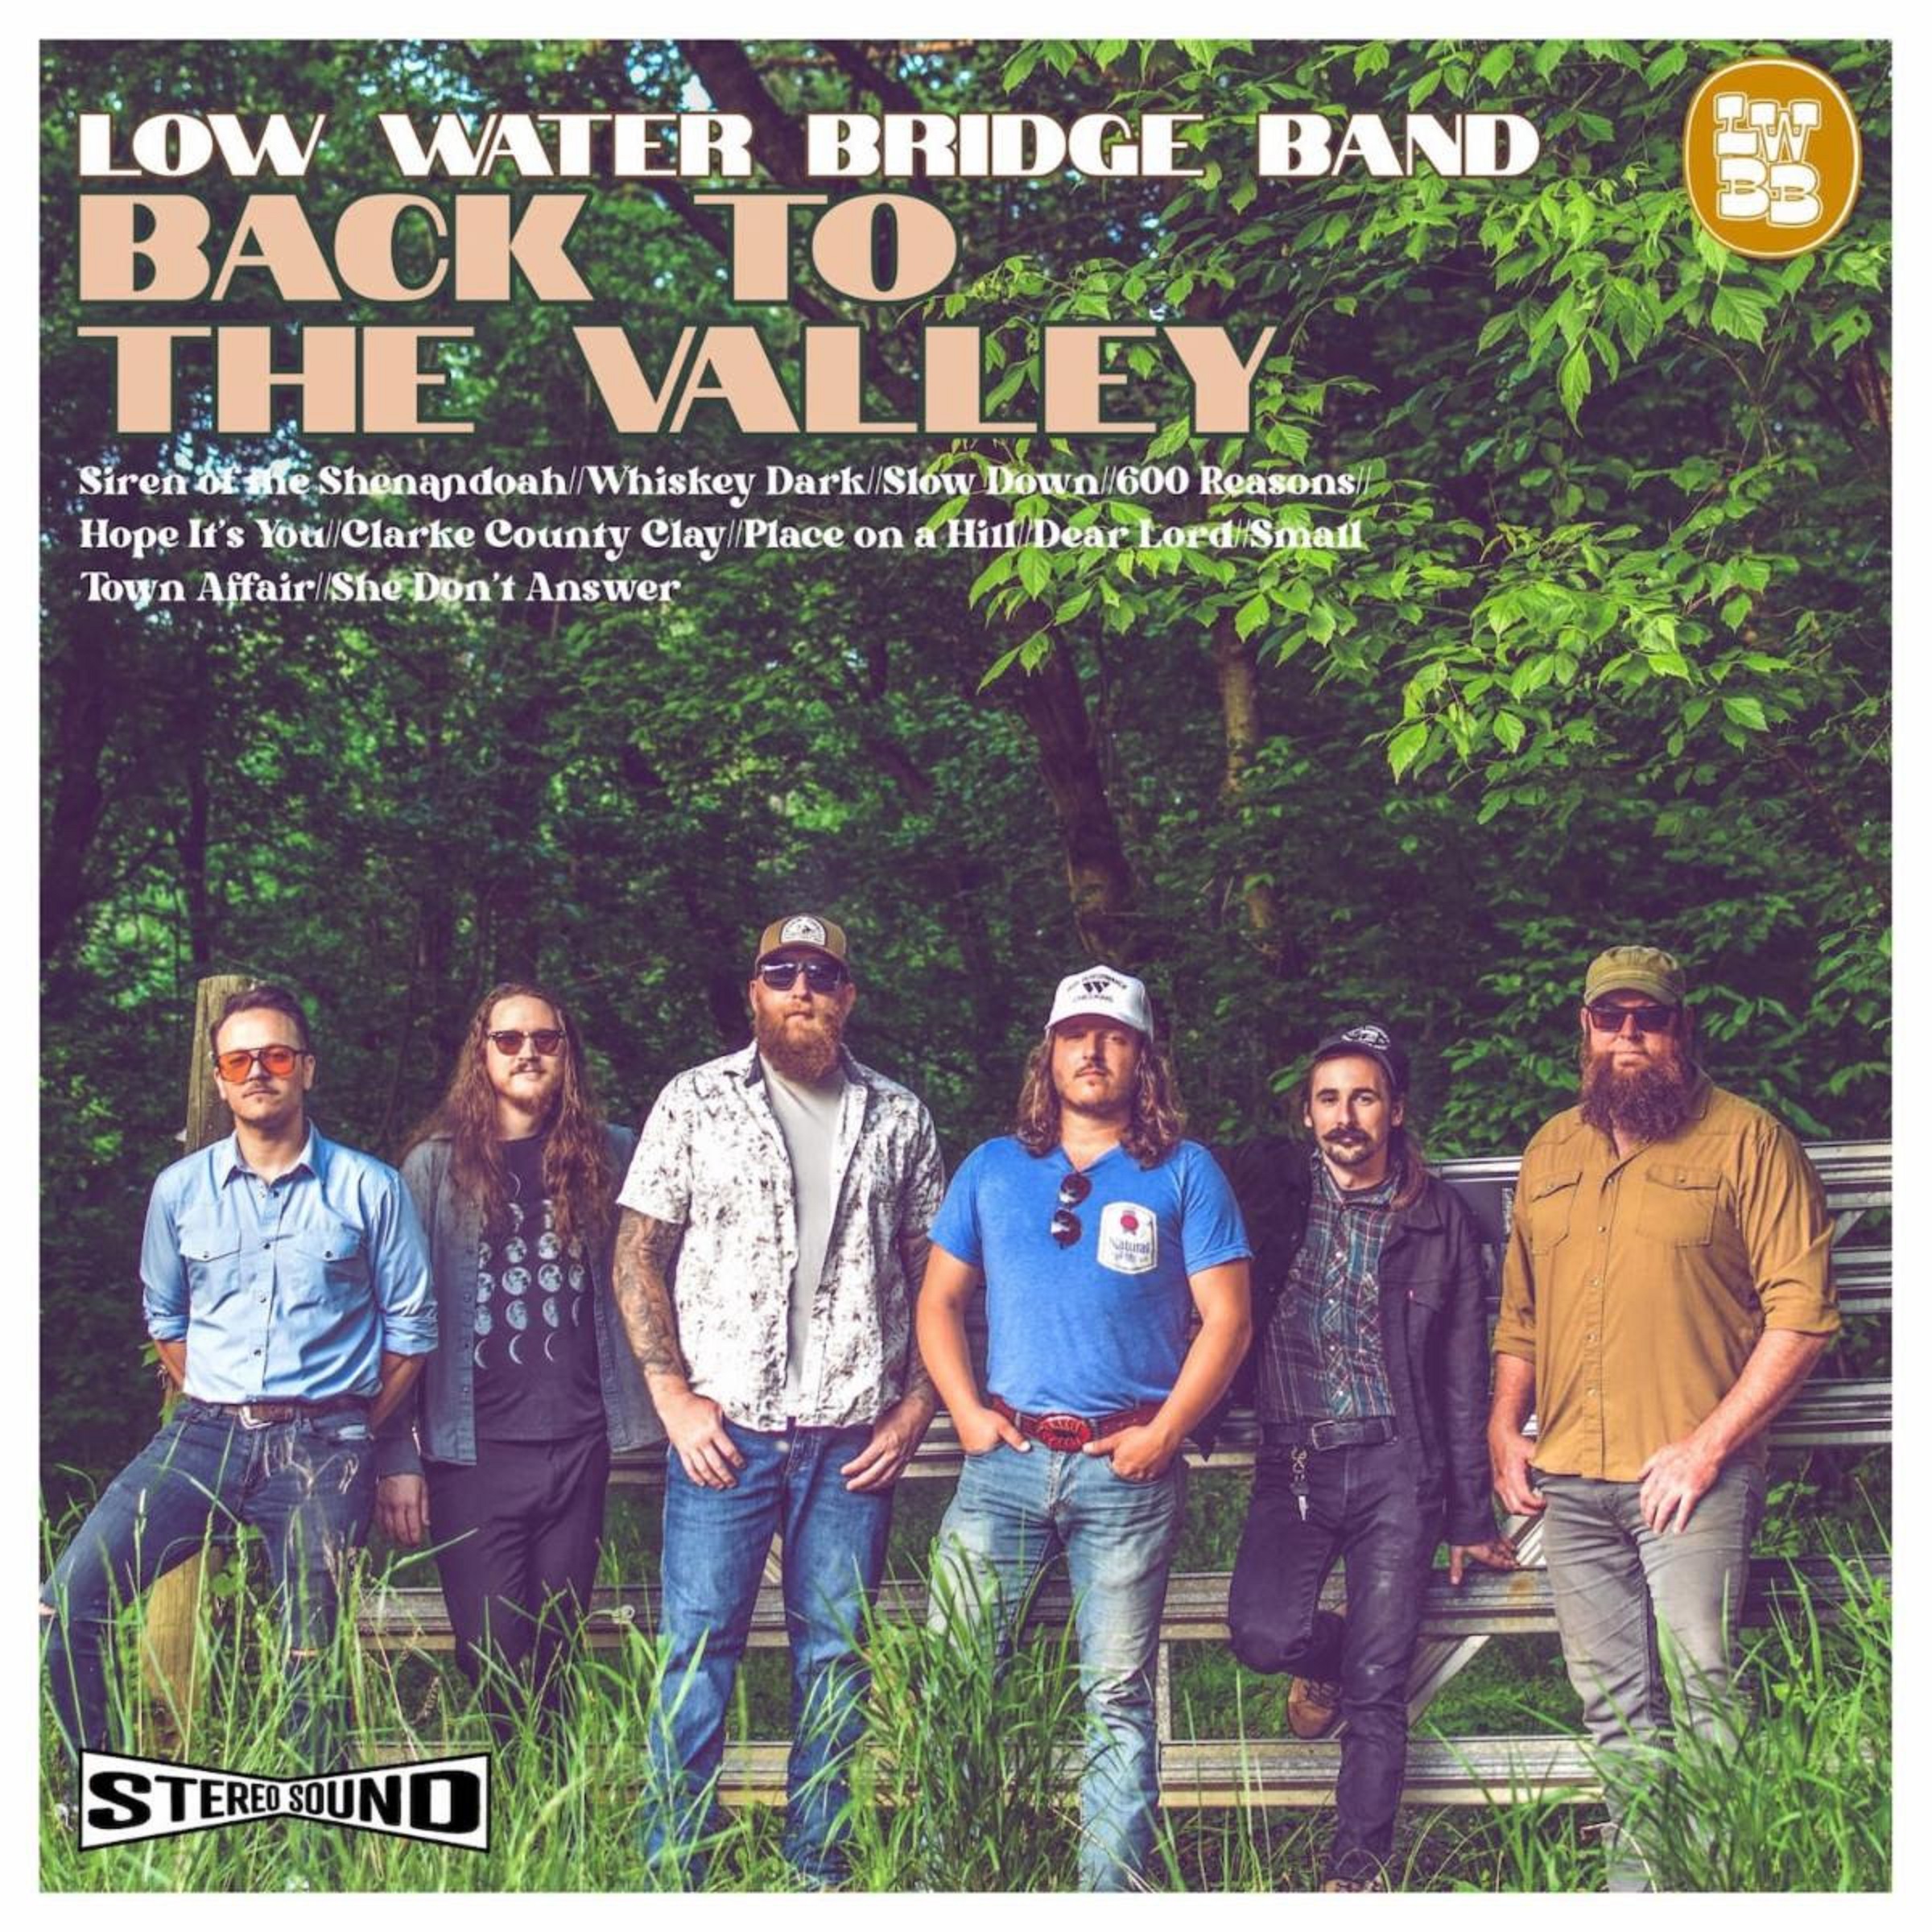 Low Water Bridge Band Effortlessly Blends Genres With Tall Tales And Guitar Wails On Sophomore LP Back to the Valley